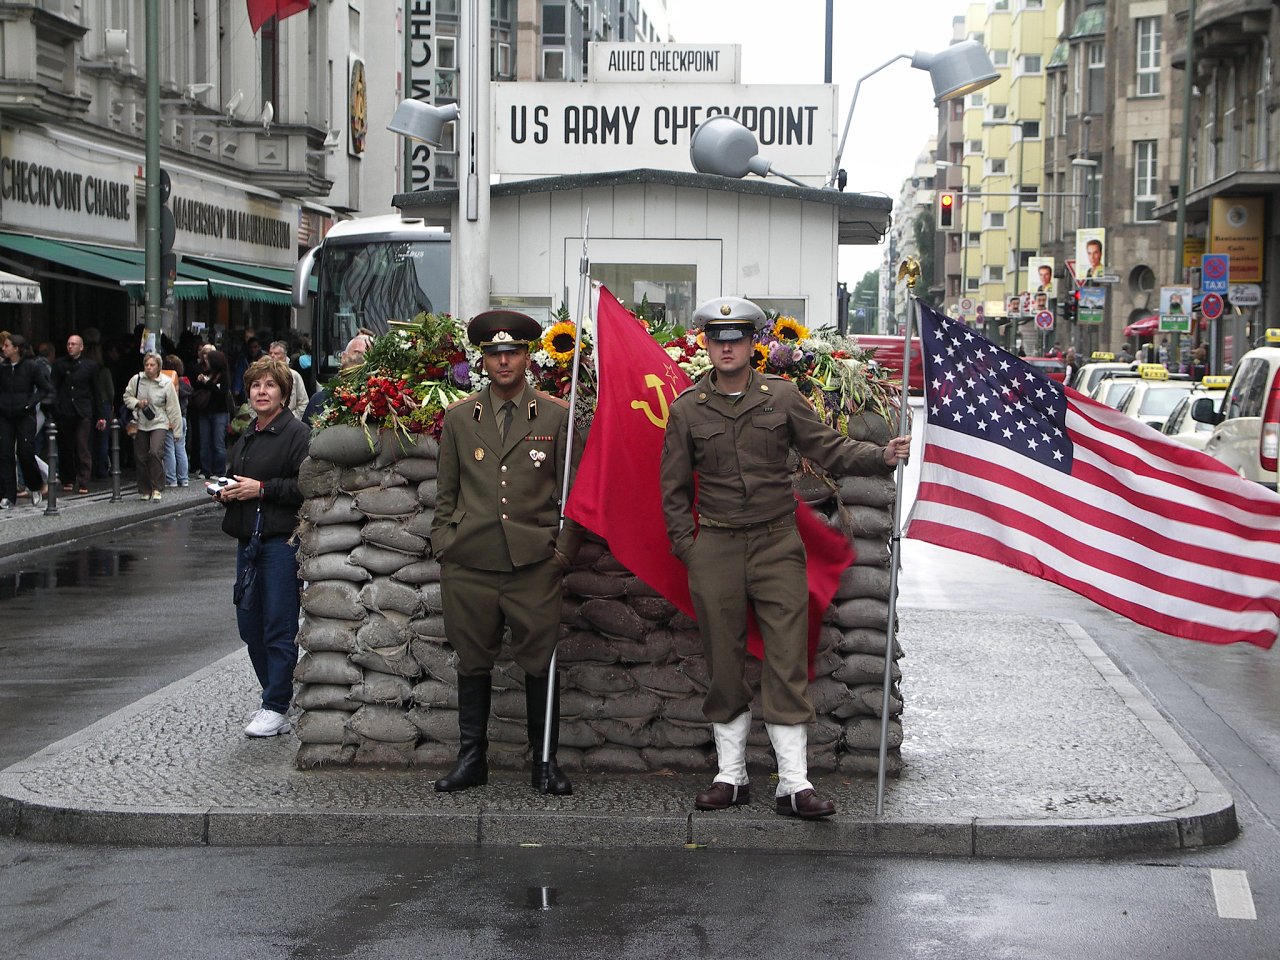 Check Point Charlie, Berlin Attractions, Germany 3